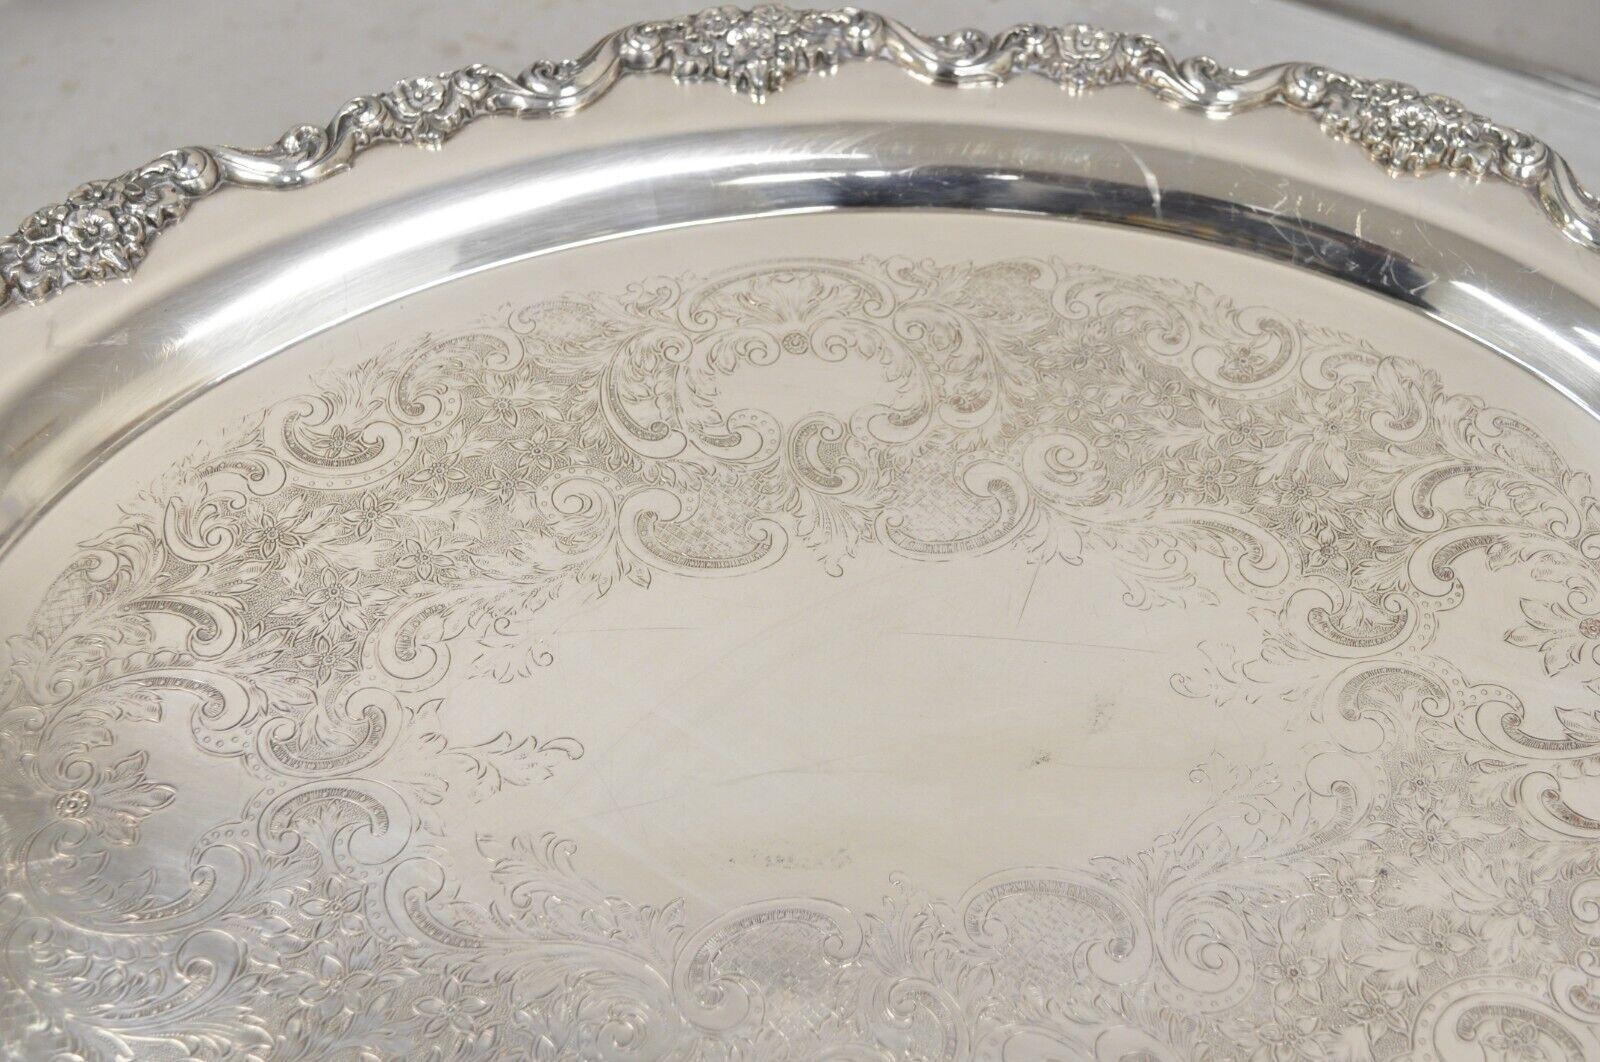 EPCA Poole Silver Co 400 Lancaster Rose Lrg Silver Plate Serving Platter Tray B For Sale 1